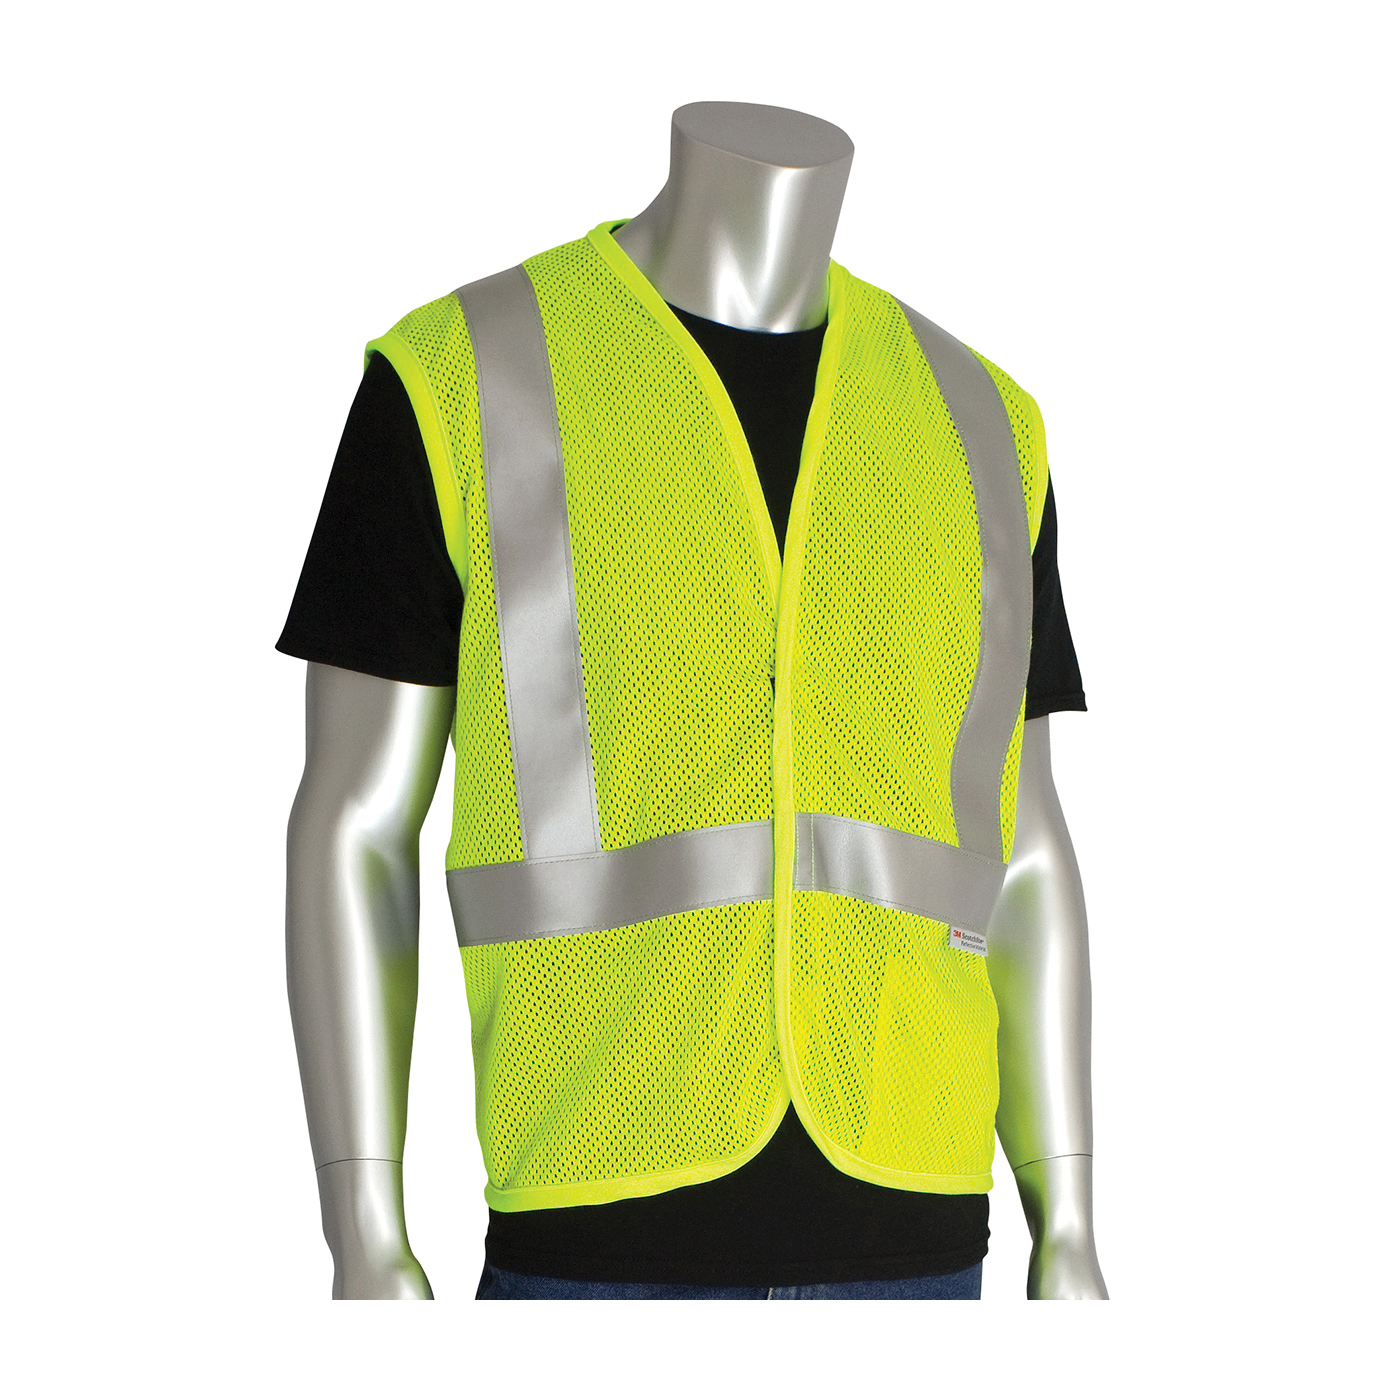 PIP® 305-2100-XL Arc and Flame Resistant Vest, XL, Hi-Viz Lime Yellow, Solid GlenGuard® Modacrylic/Aramid Blend Mesh Fabric, Hook and Loop Closure, 1 Pockets, ANSI Class: Class 2, Specifications Met: ANSI 107 Type R